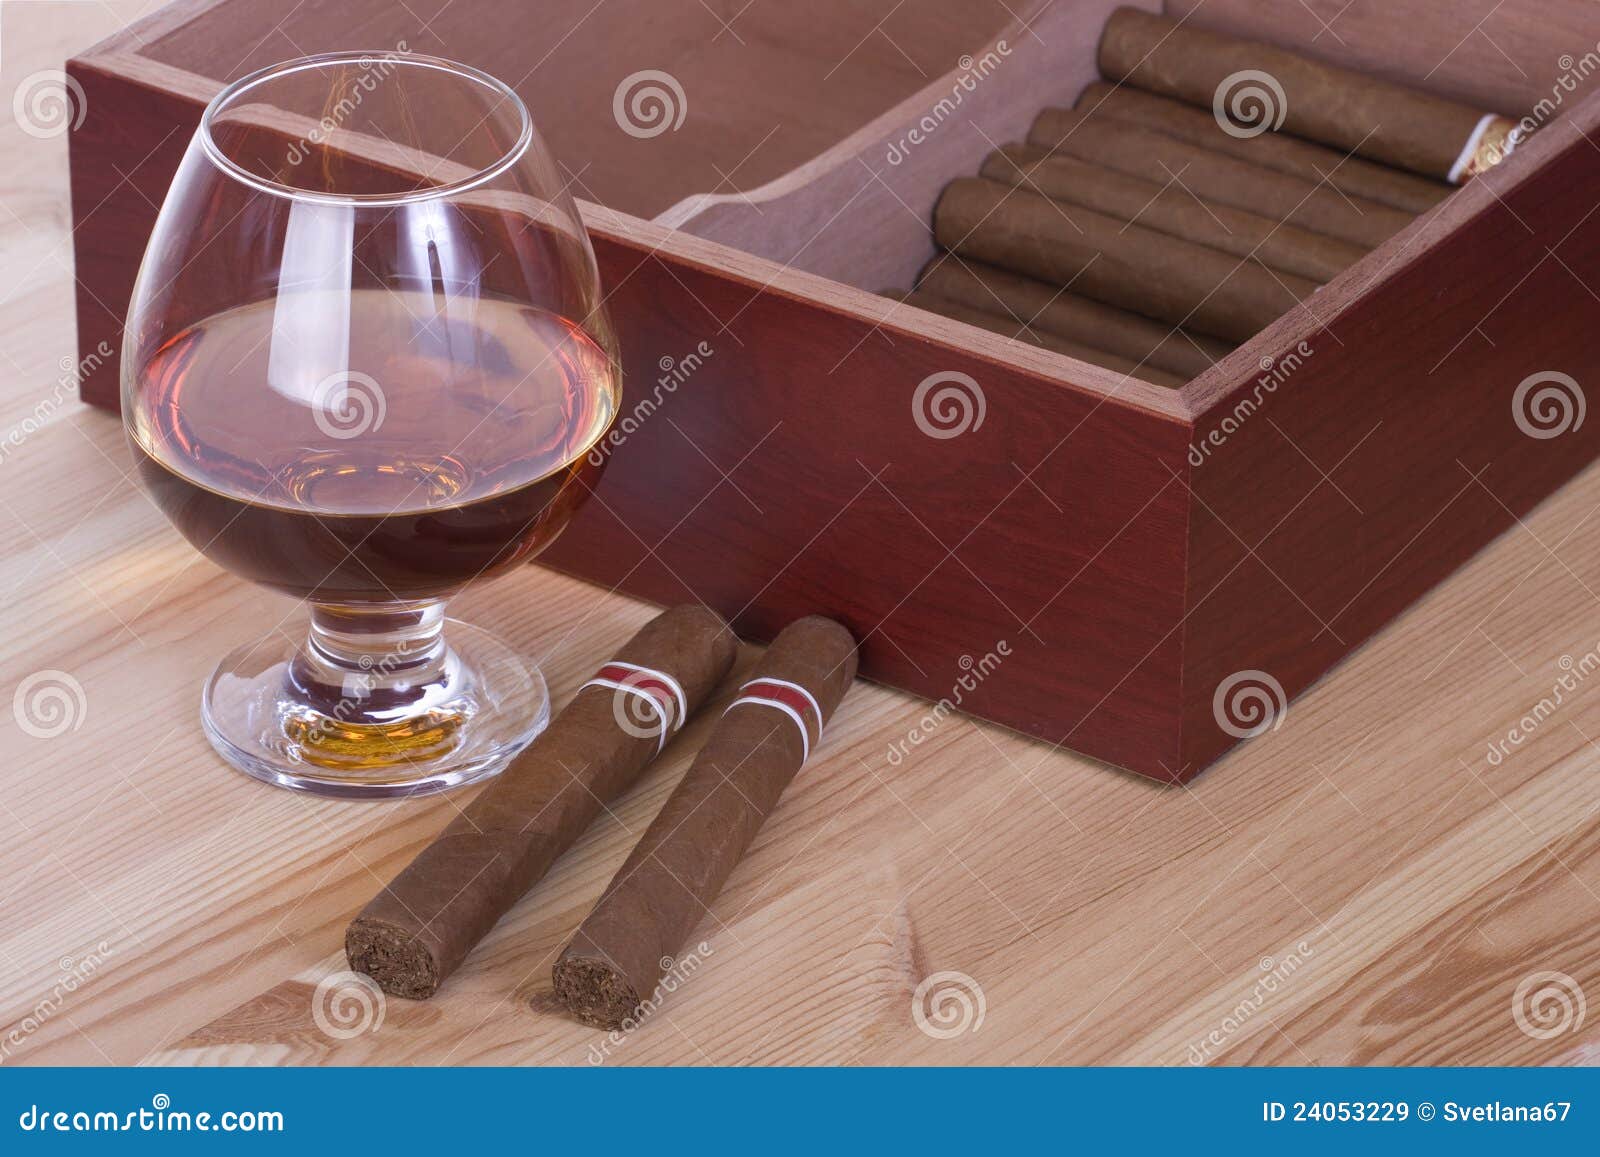 glass of brandy and cigars